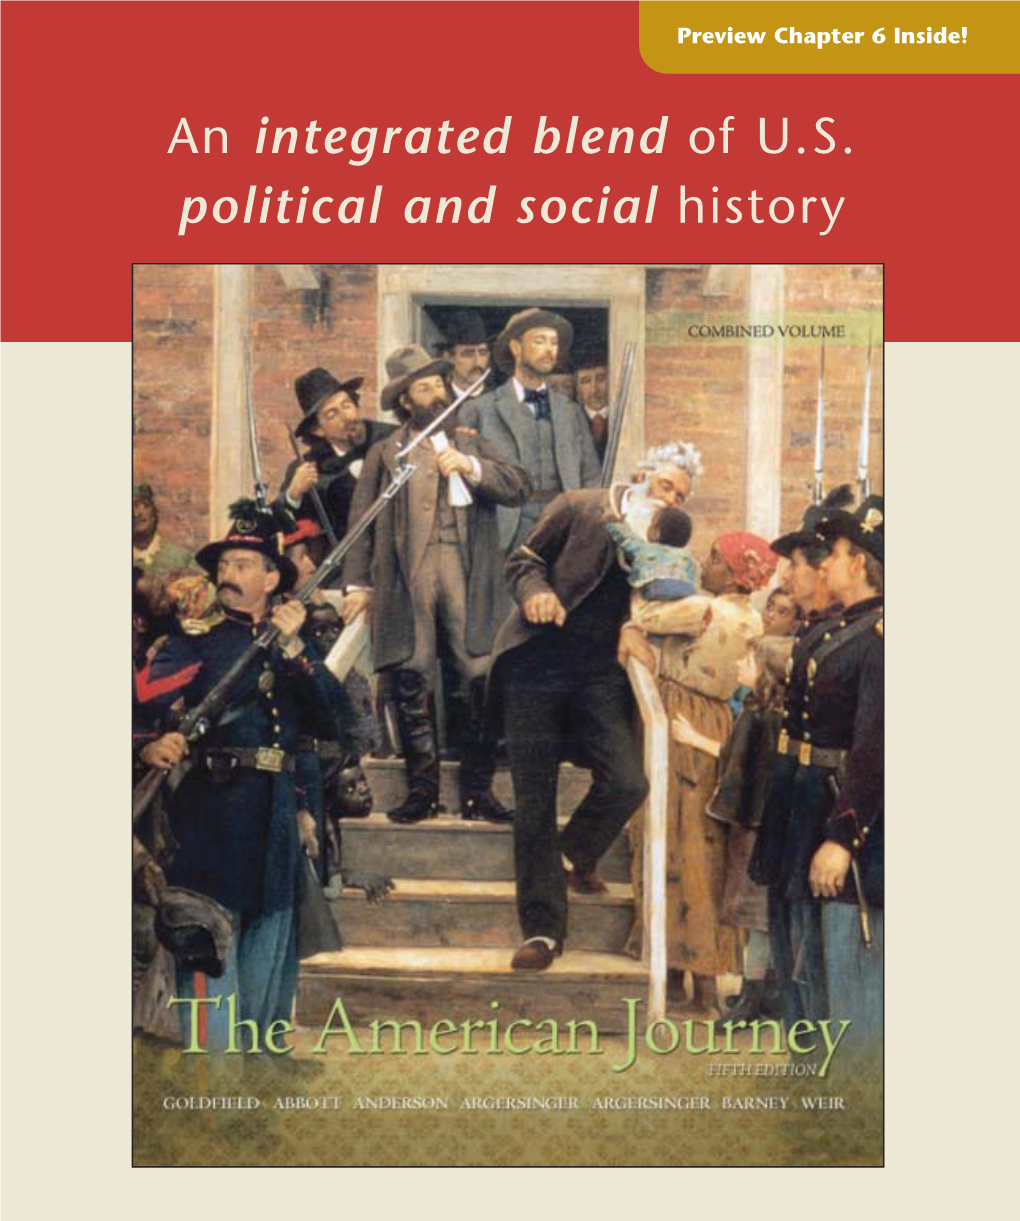 An Integrated Blend of U.S. Political and Social History